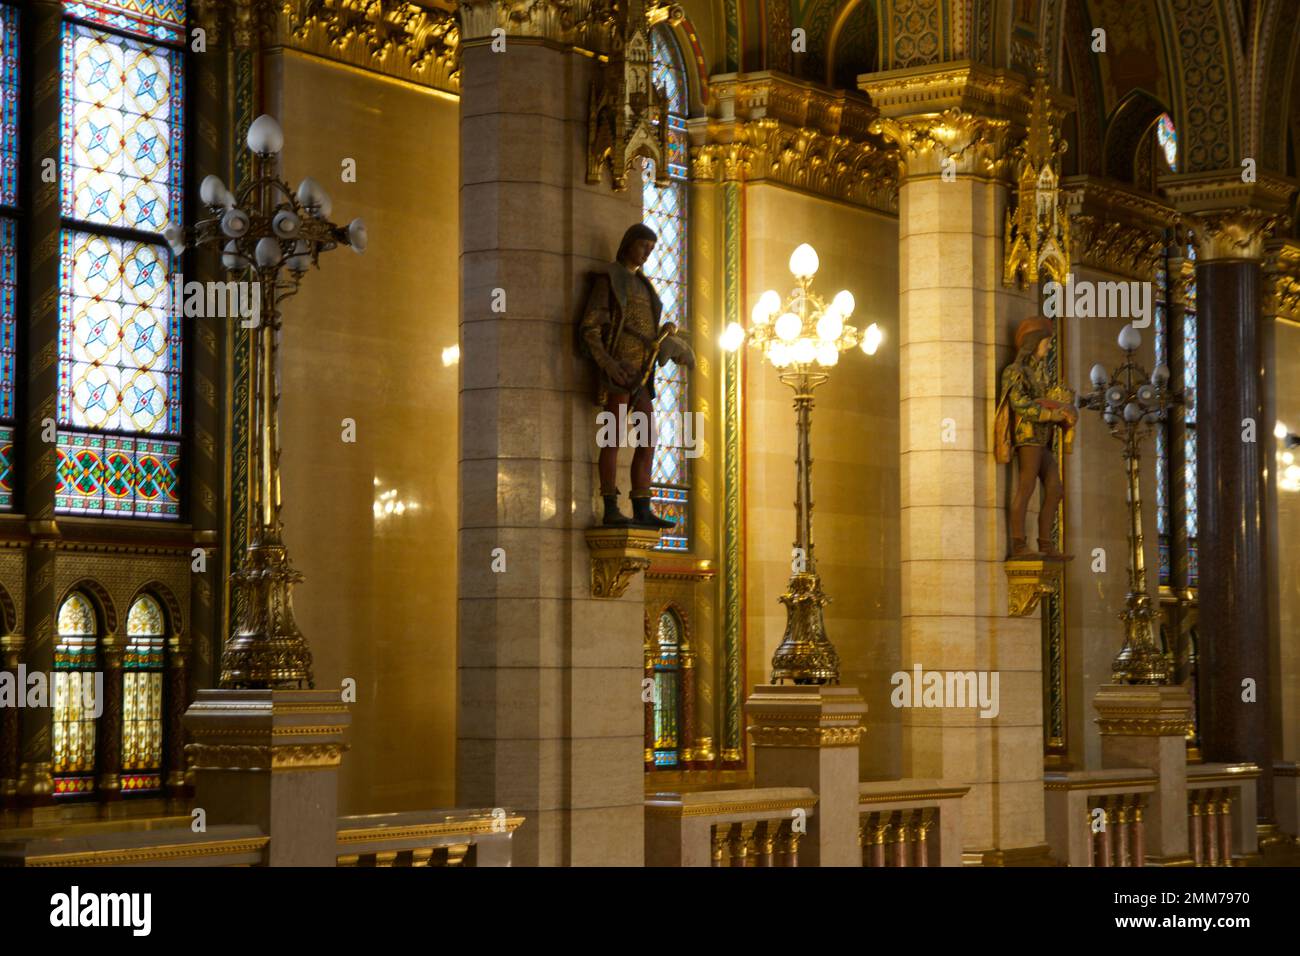 BUDAPEST, HUNGARY - MARCH 03, 2019: Gallery with lots of gold, marble and sandstone inside the Budapest Parliament building, the seat of the Stock Photo